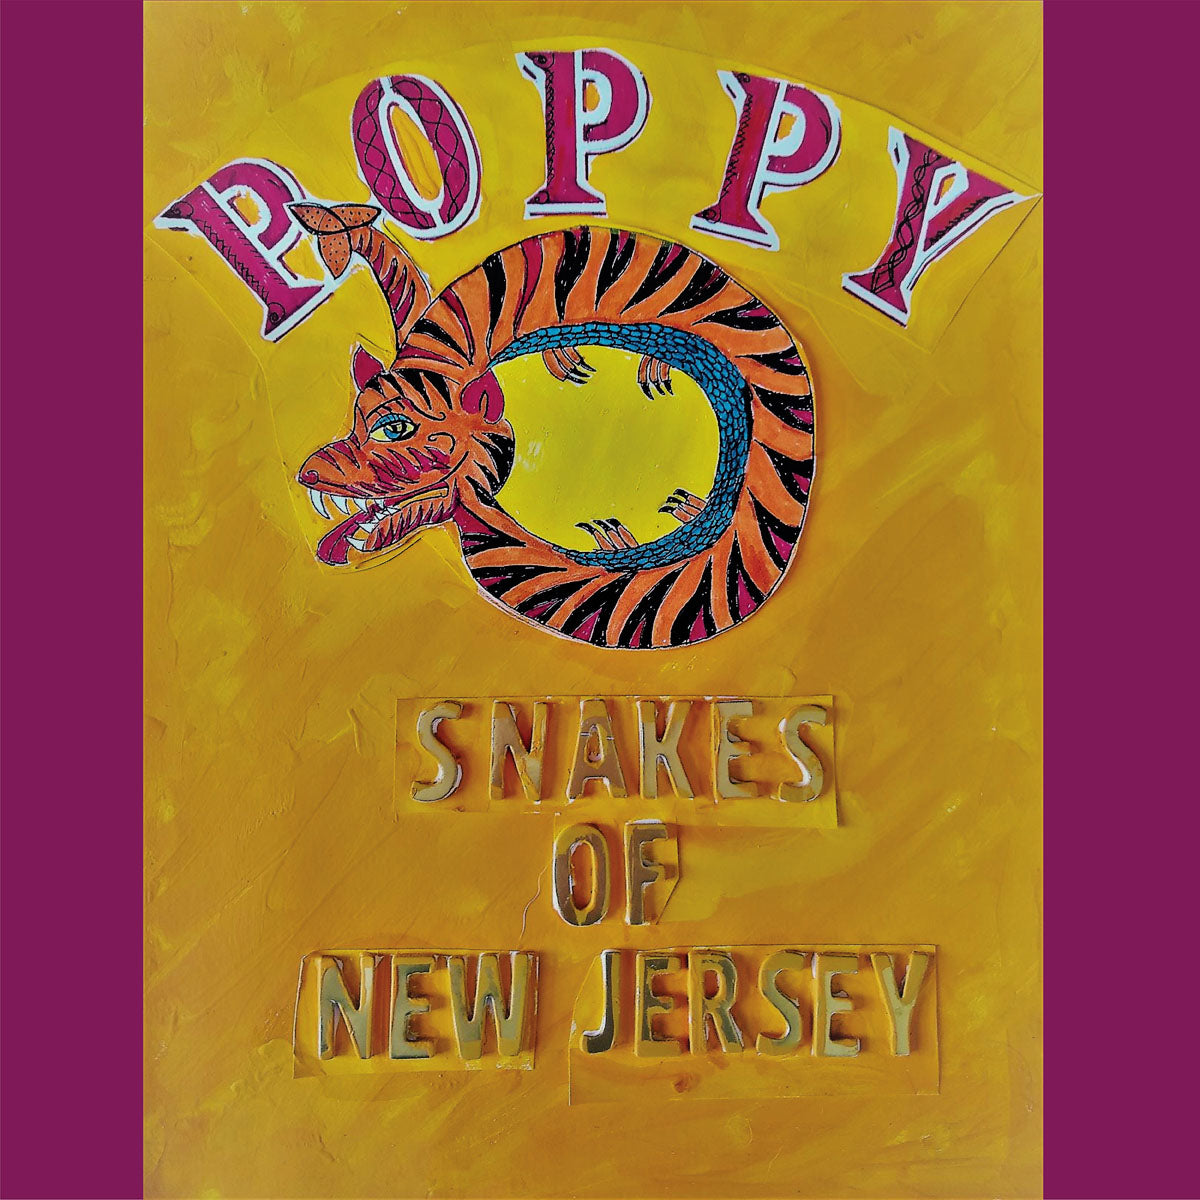 Poppy- Snakes Of New Jersey LP ~EX ELECTRIC LOVE MUFFIN / SCRAM!